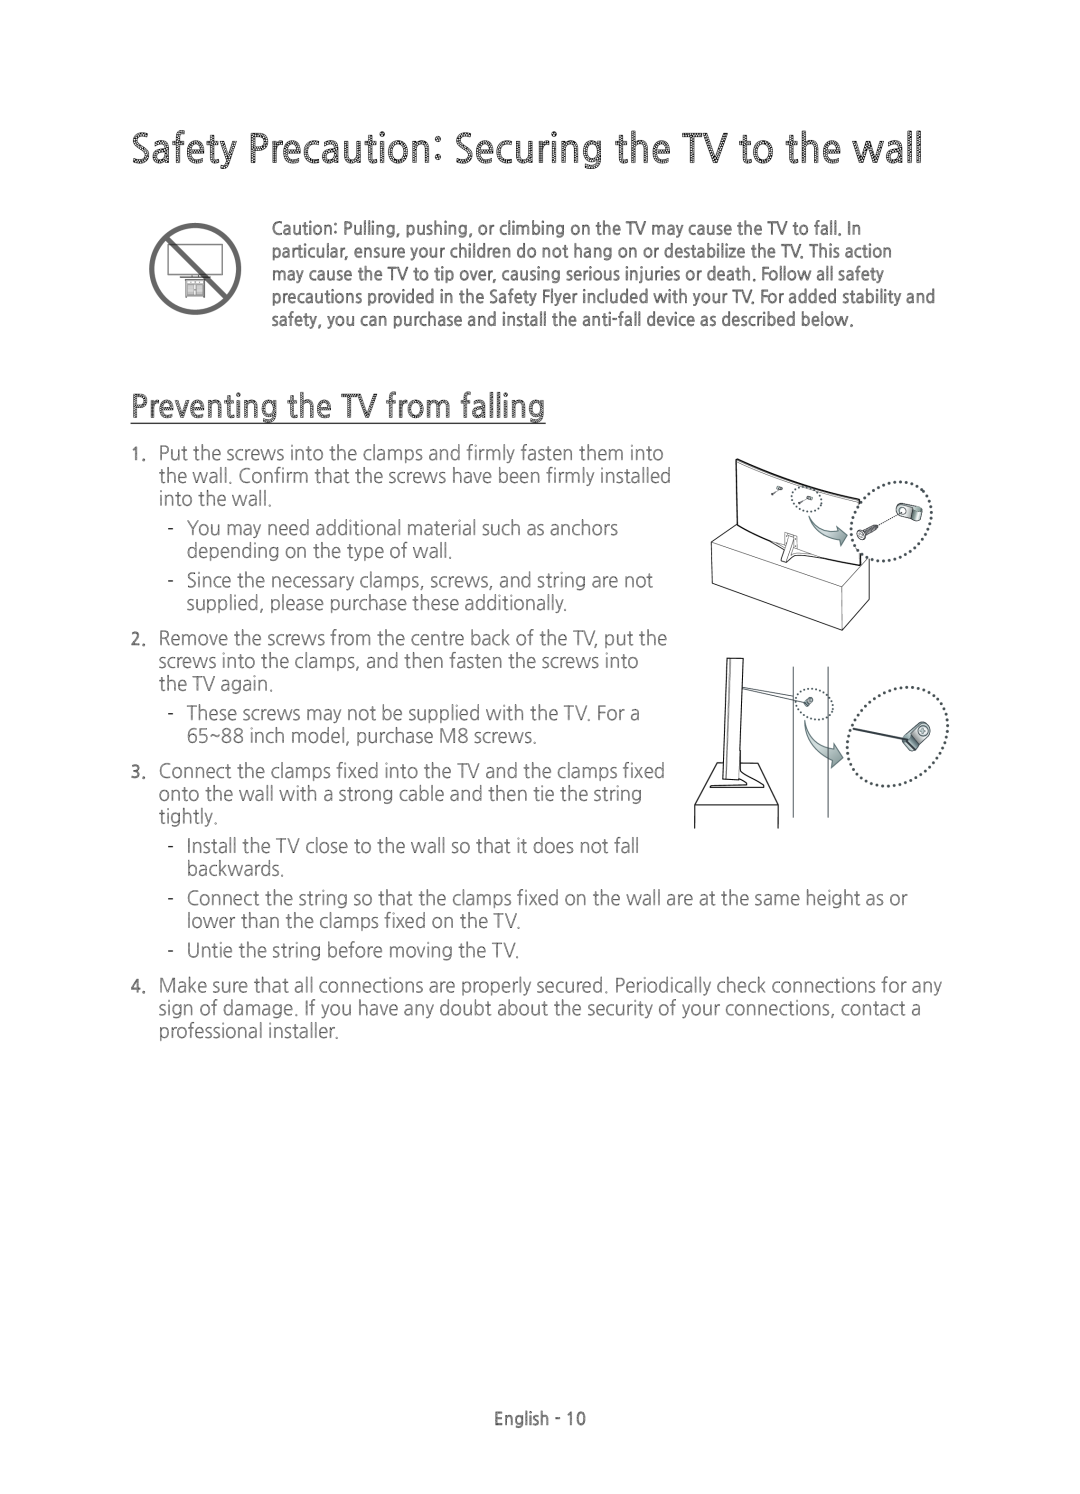 Samsung UE88JS9500TXXU, UE88JS9500TXZF manual Safety Precaution Securing the TV to the wall, Preventing the TV from falling 